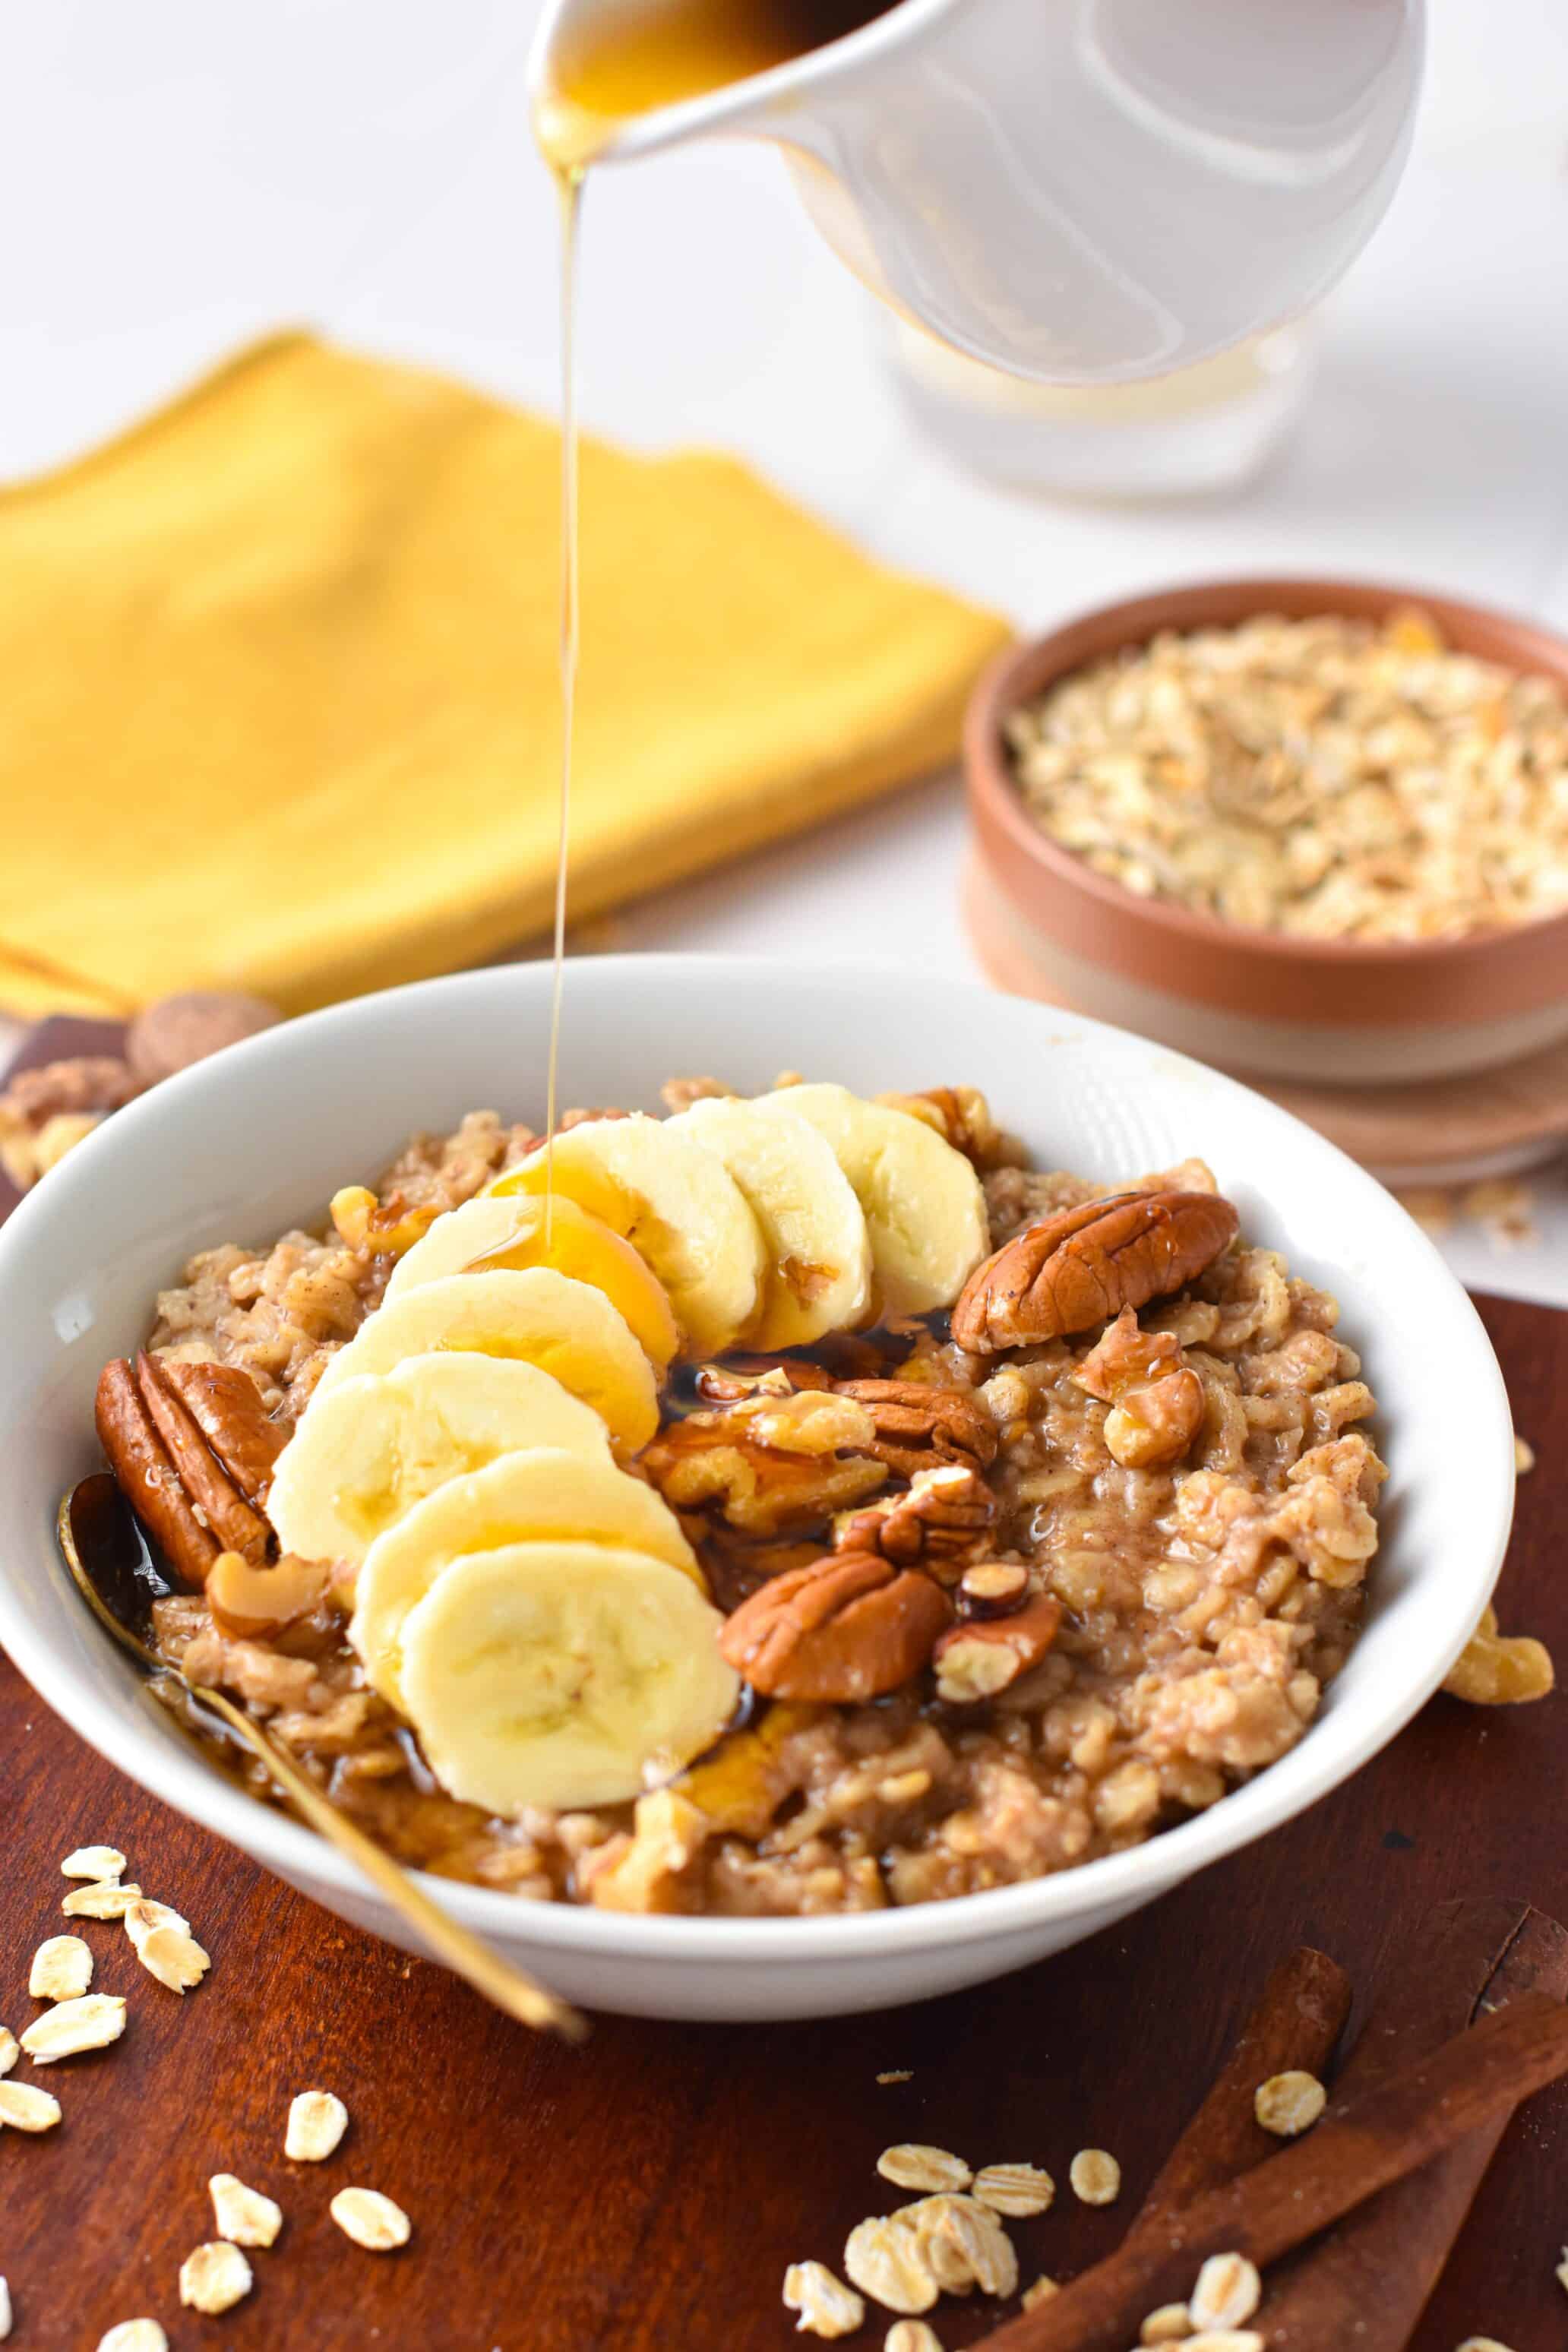 A bowl oaf cinnamon oatmeal with banana slices, pecans and walnuts.